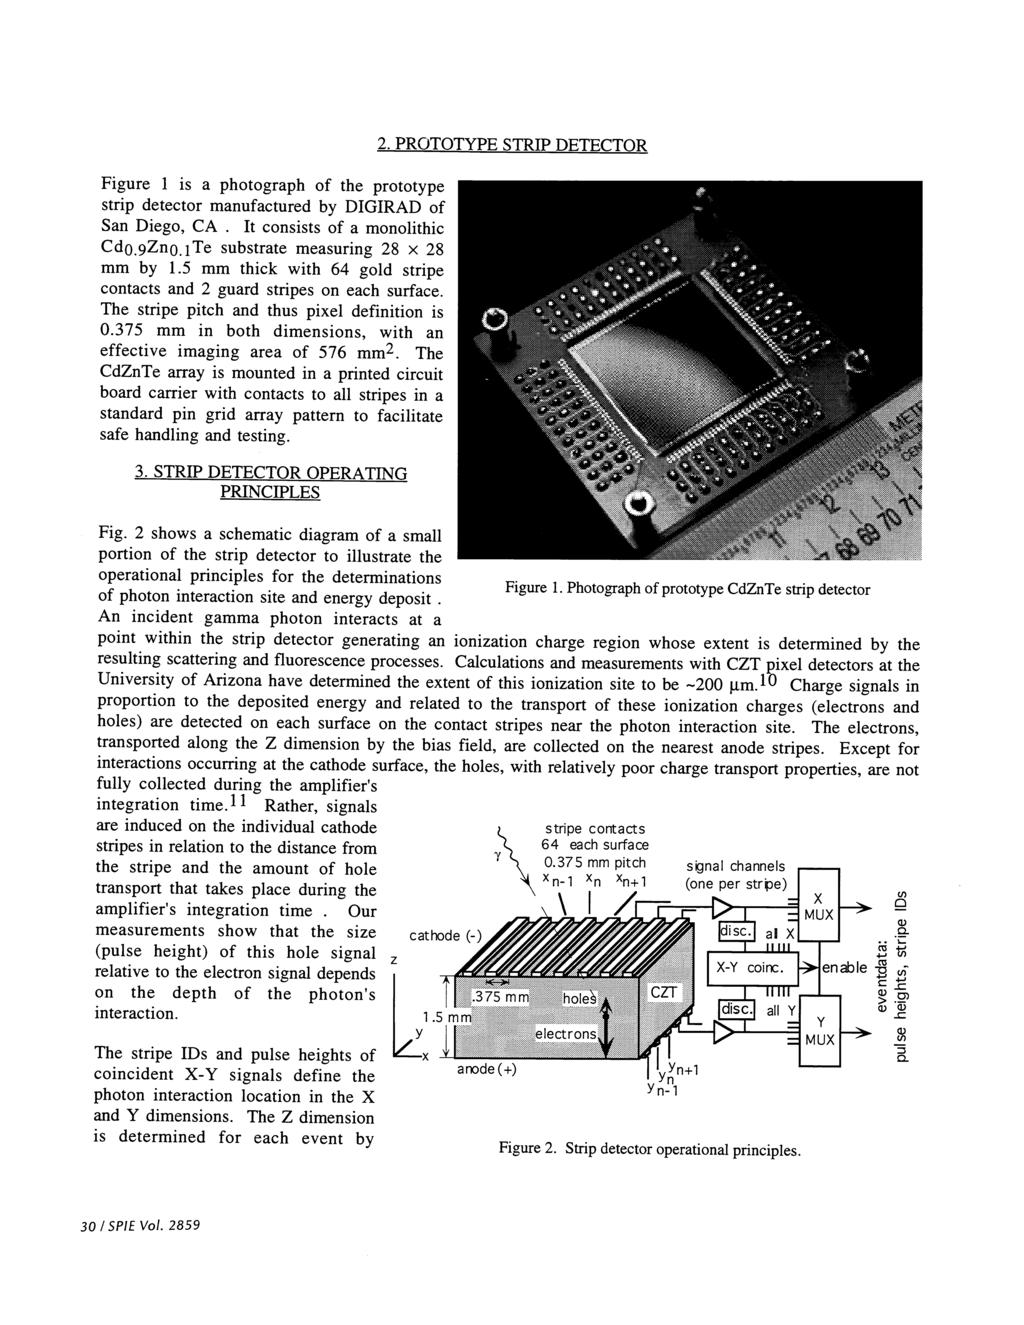 Figure 1 is a photograph of the prototype strip detector manufactured by DIGIRAD of San Diego, CA. It consists of a monolithic CdØ9Zn0 i Te substrate measuring 28 x 28 mm by 1.